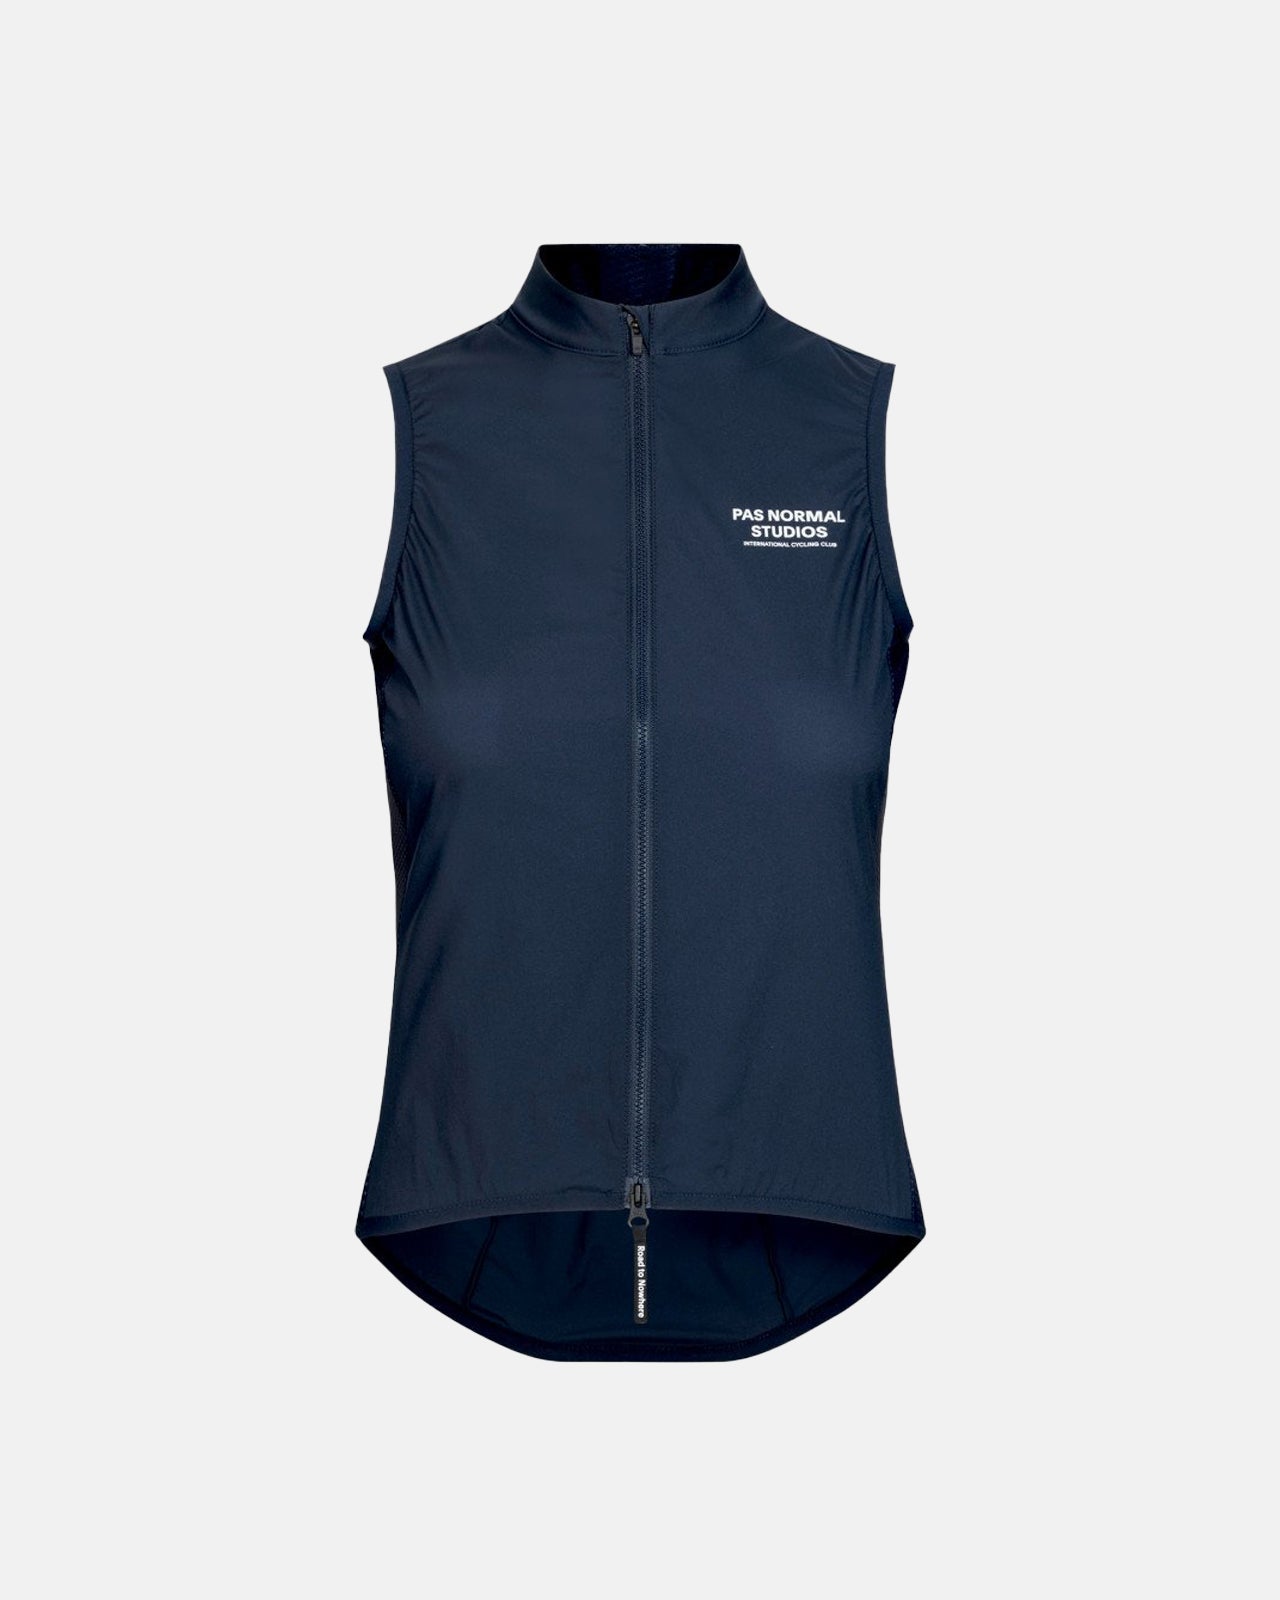 Pas Normal Studios - Cycling Vests only at Enroute.cc